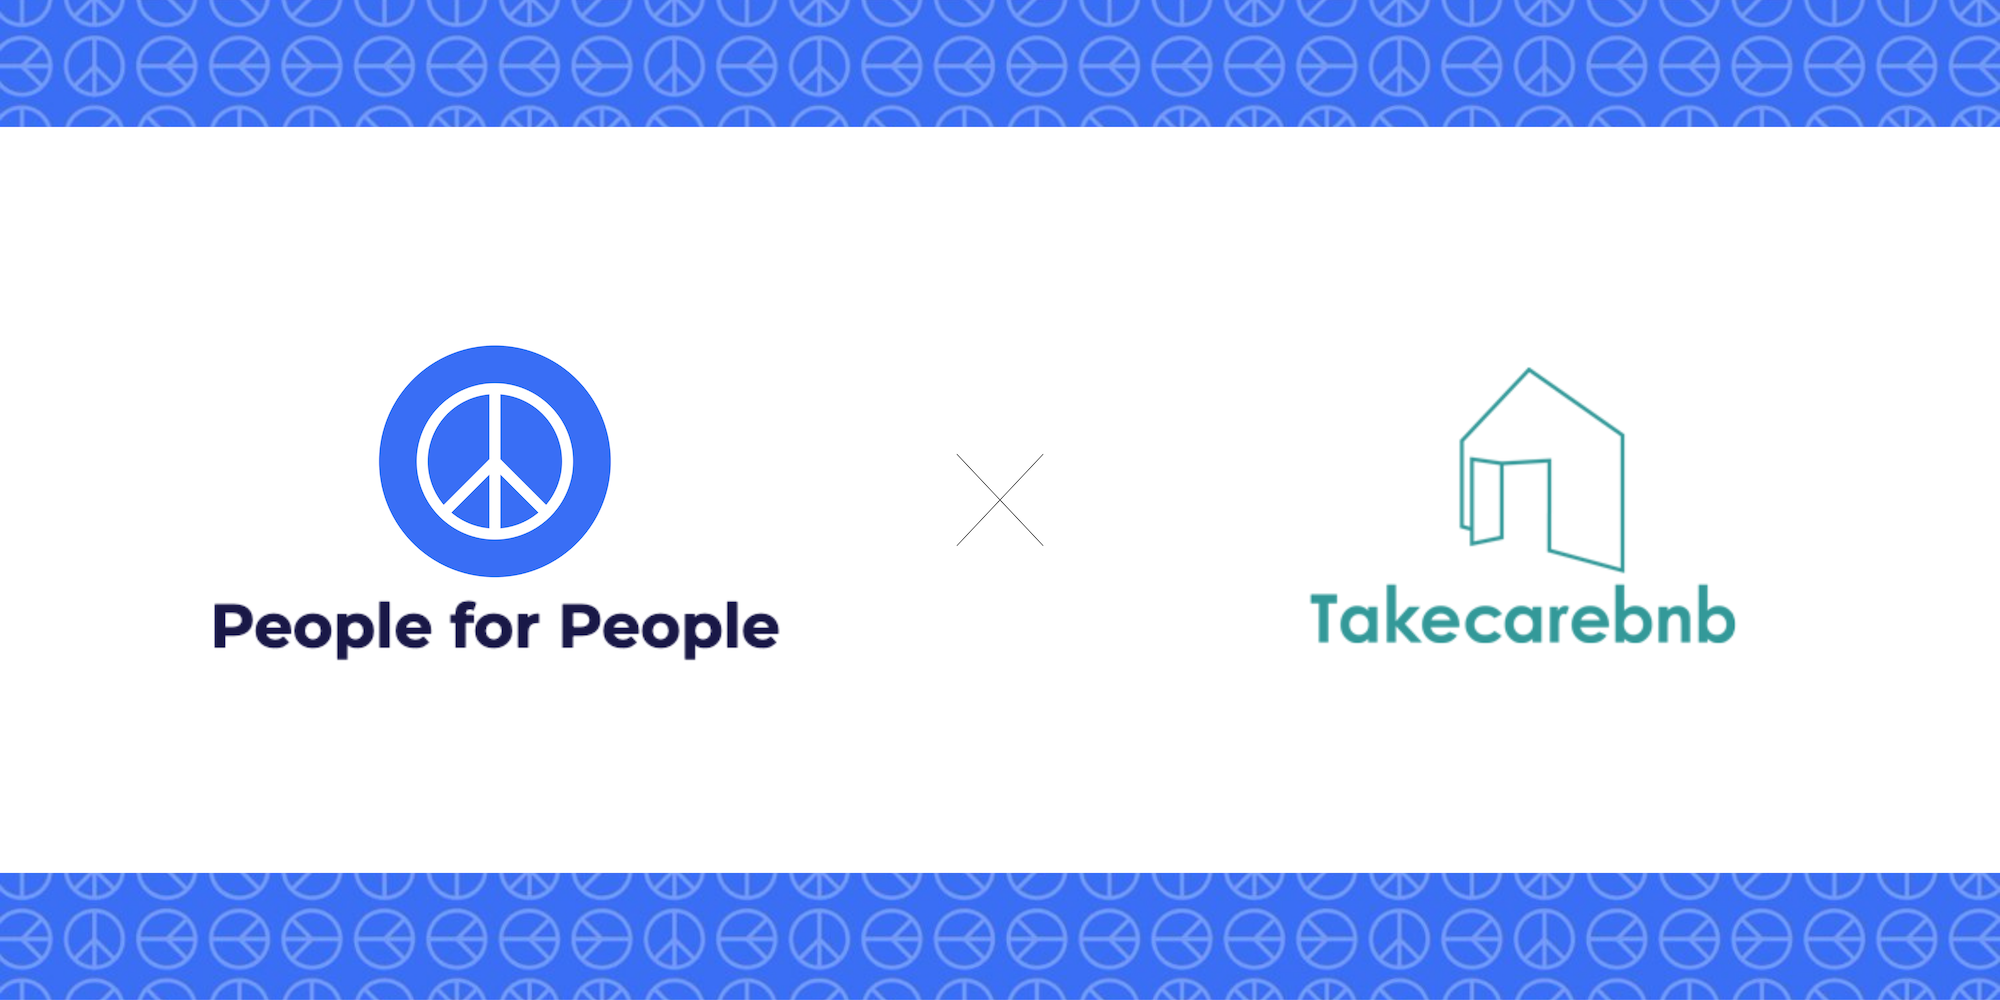 Partnership with Takecarebnb to provide shelter to refugees at scale